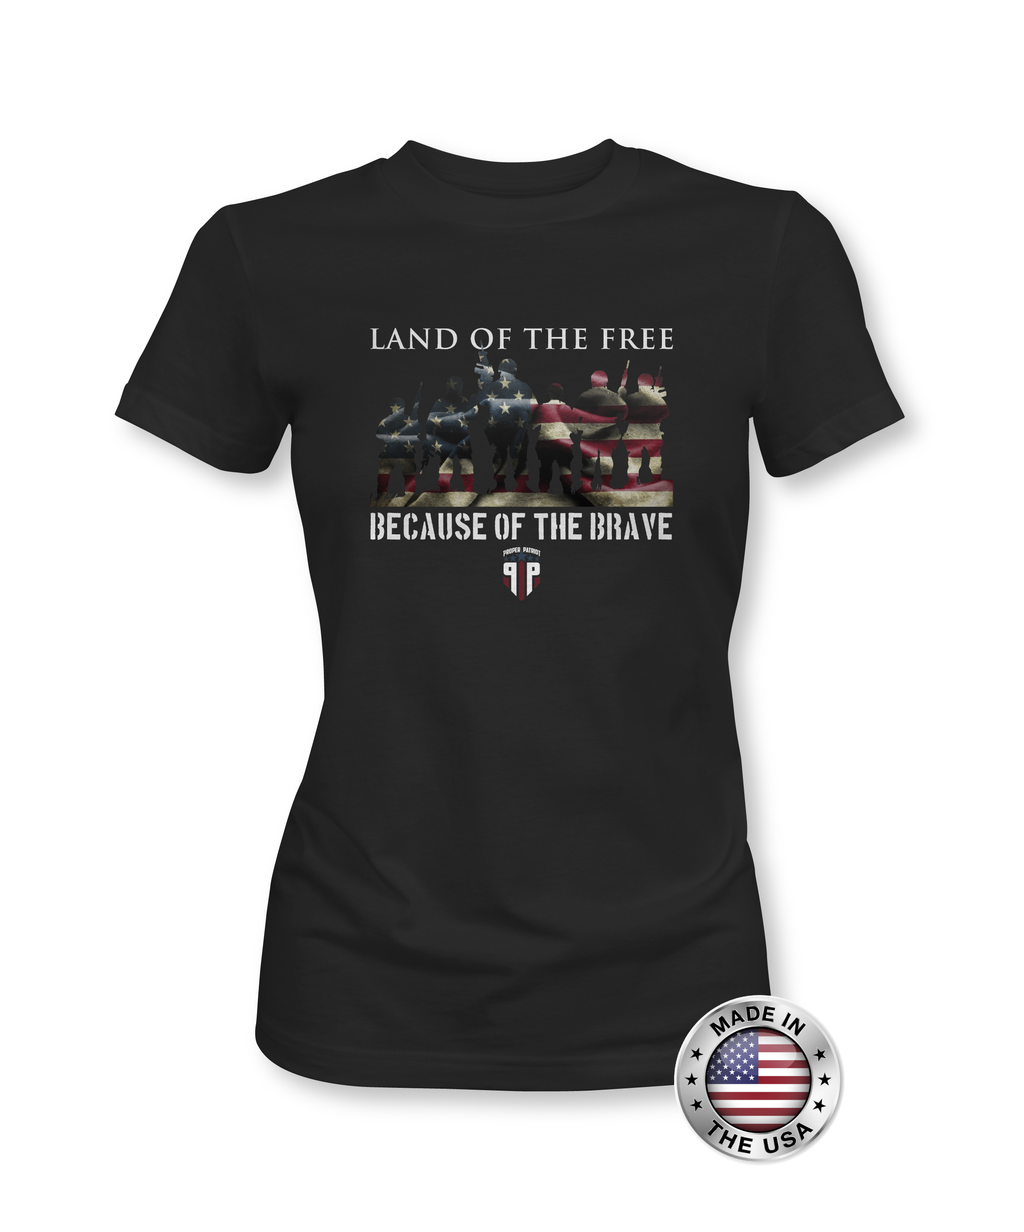 Land Of The Free Because Of The Brave - American Flag Shirt - Women's Patriotic Shirts - Proper Patriot